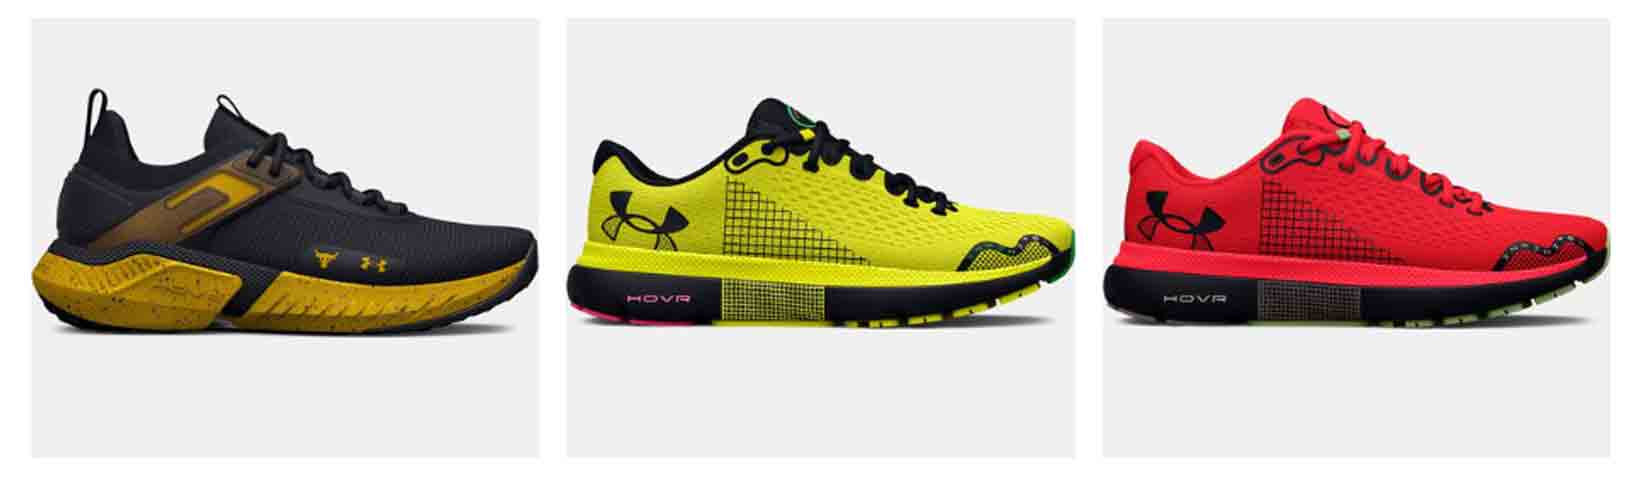 Under Armour Shoes Coupons